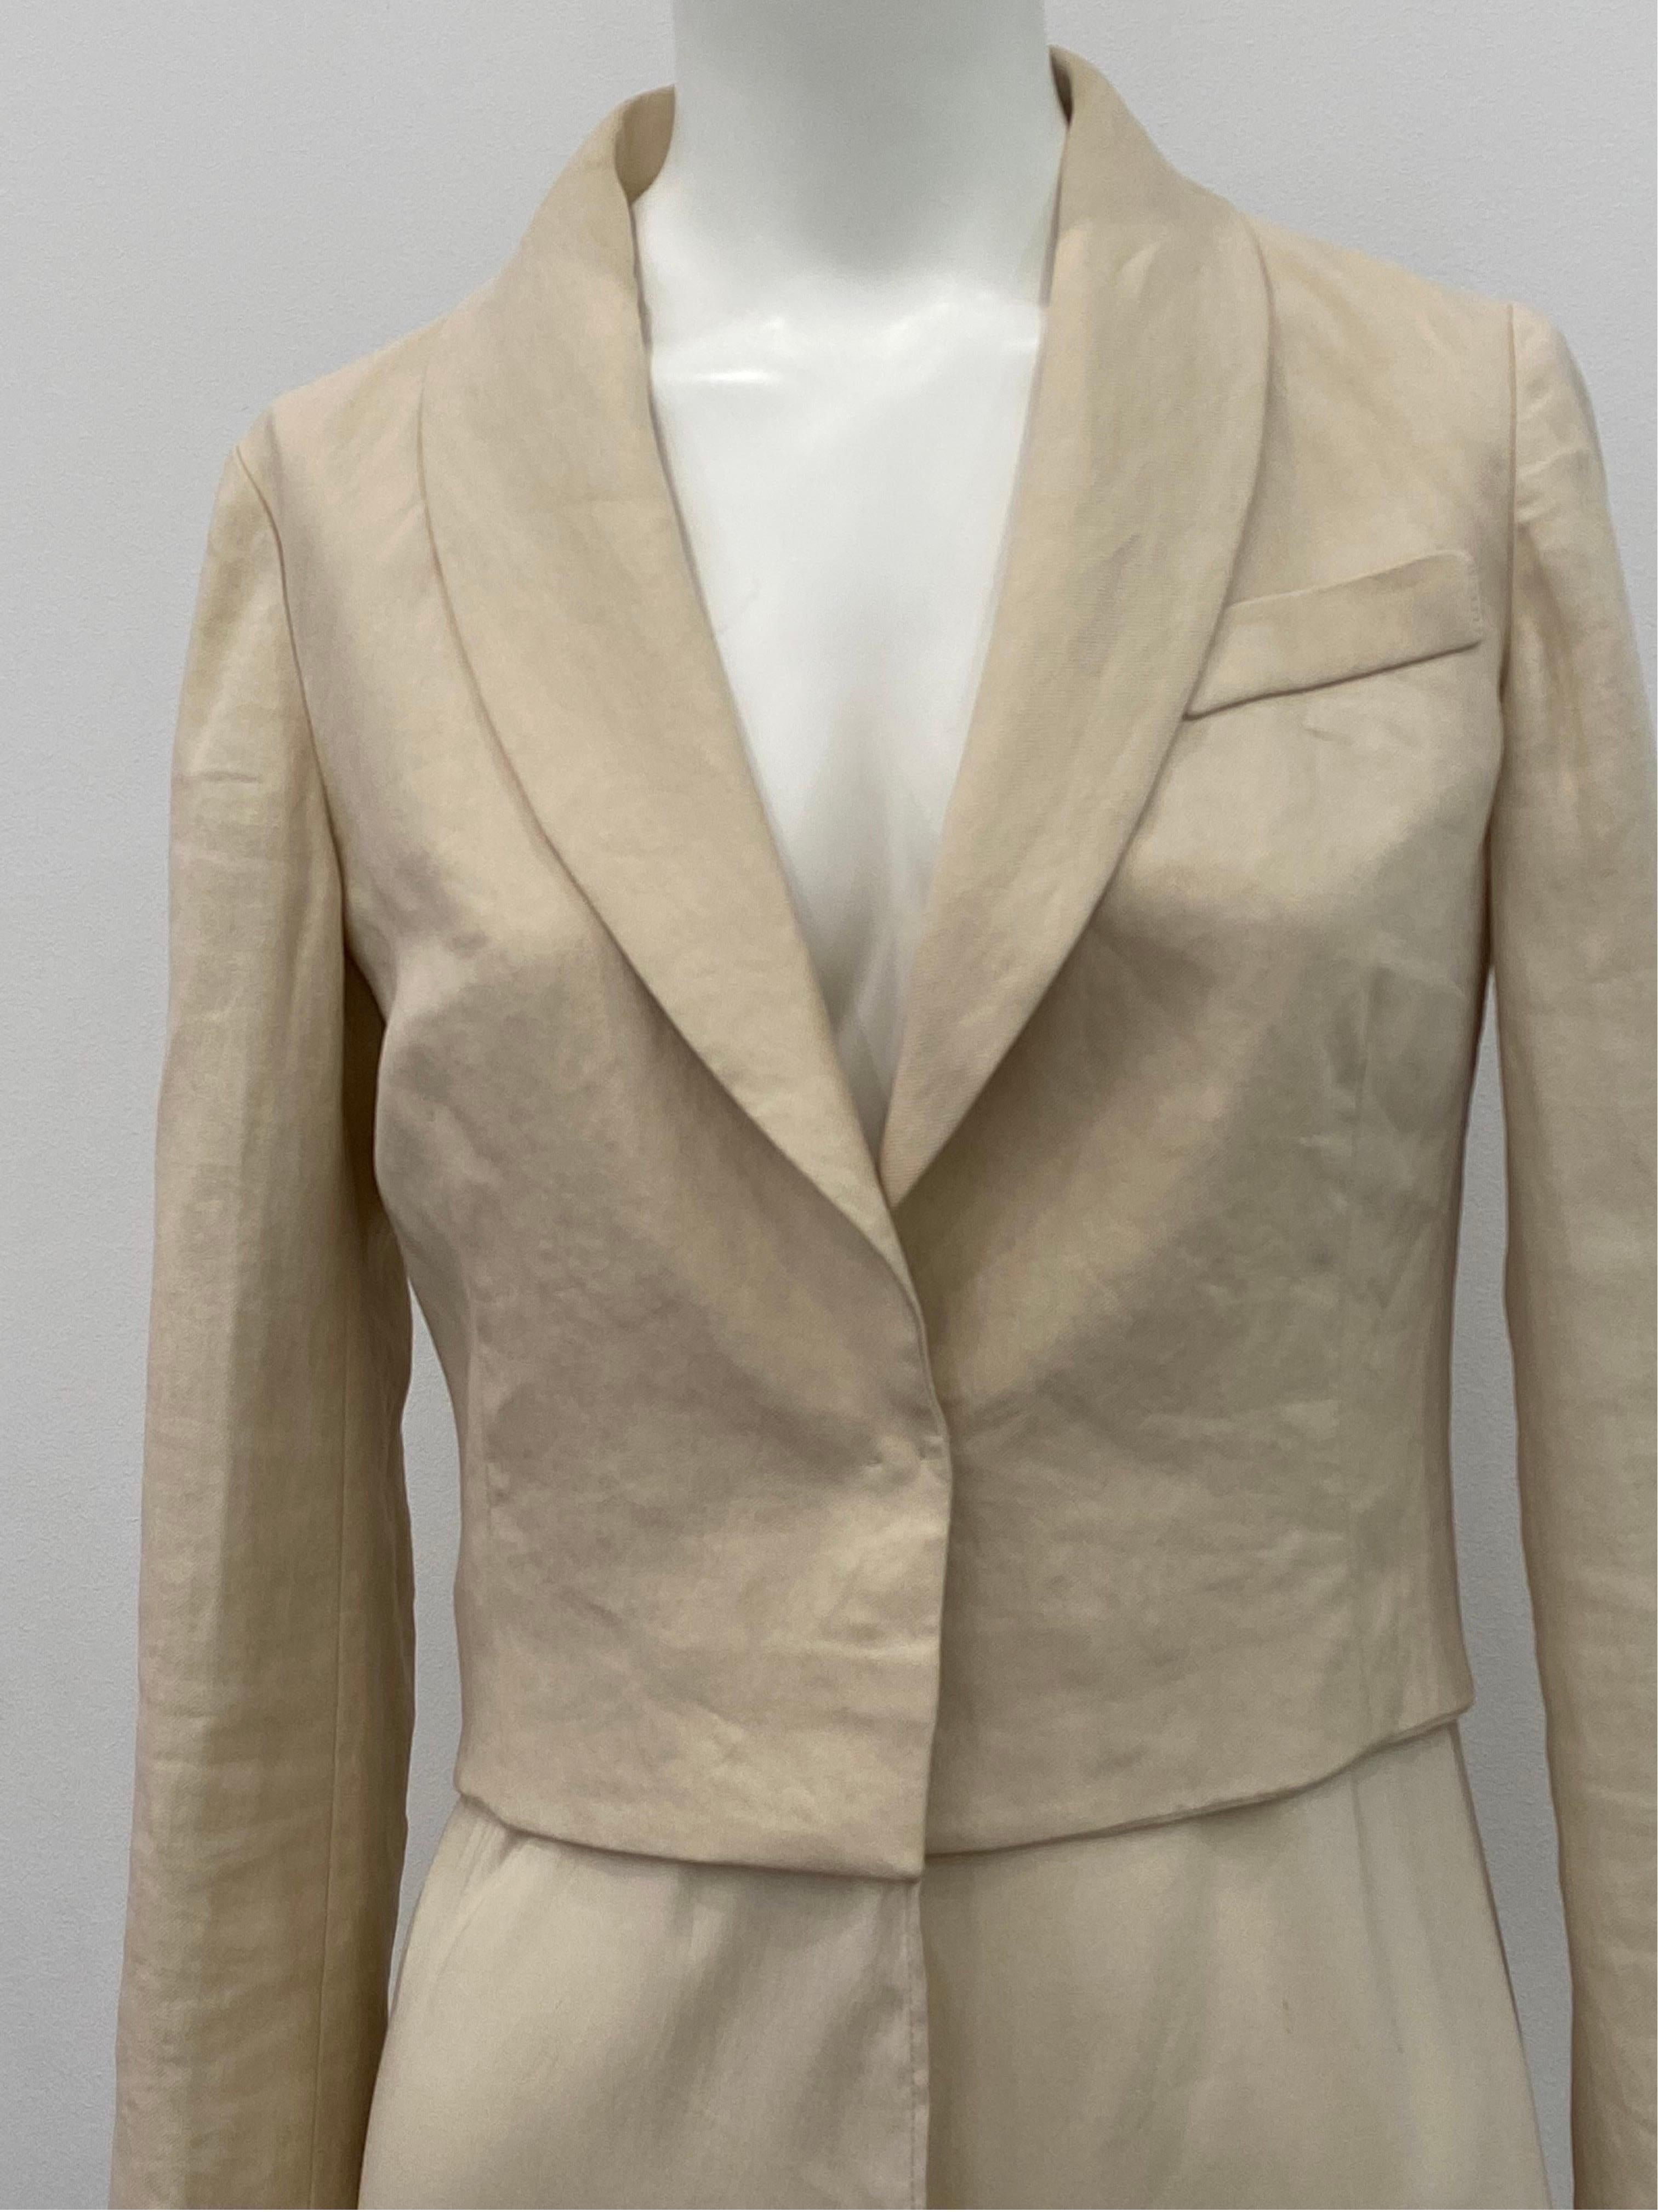 Brunello Cucinelli Beige Cotton with Chiffon Bottom Long Jacket - Sz 38 In Excellent Condition For Sale In West Palm Beach, FL